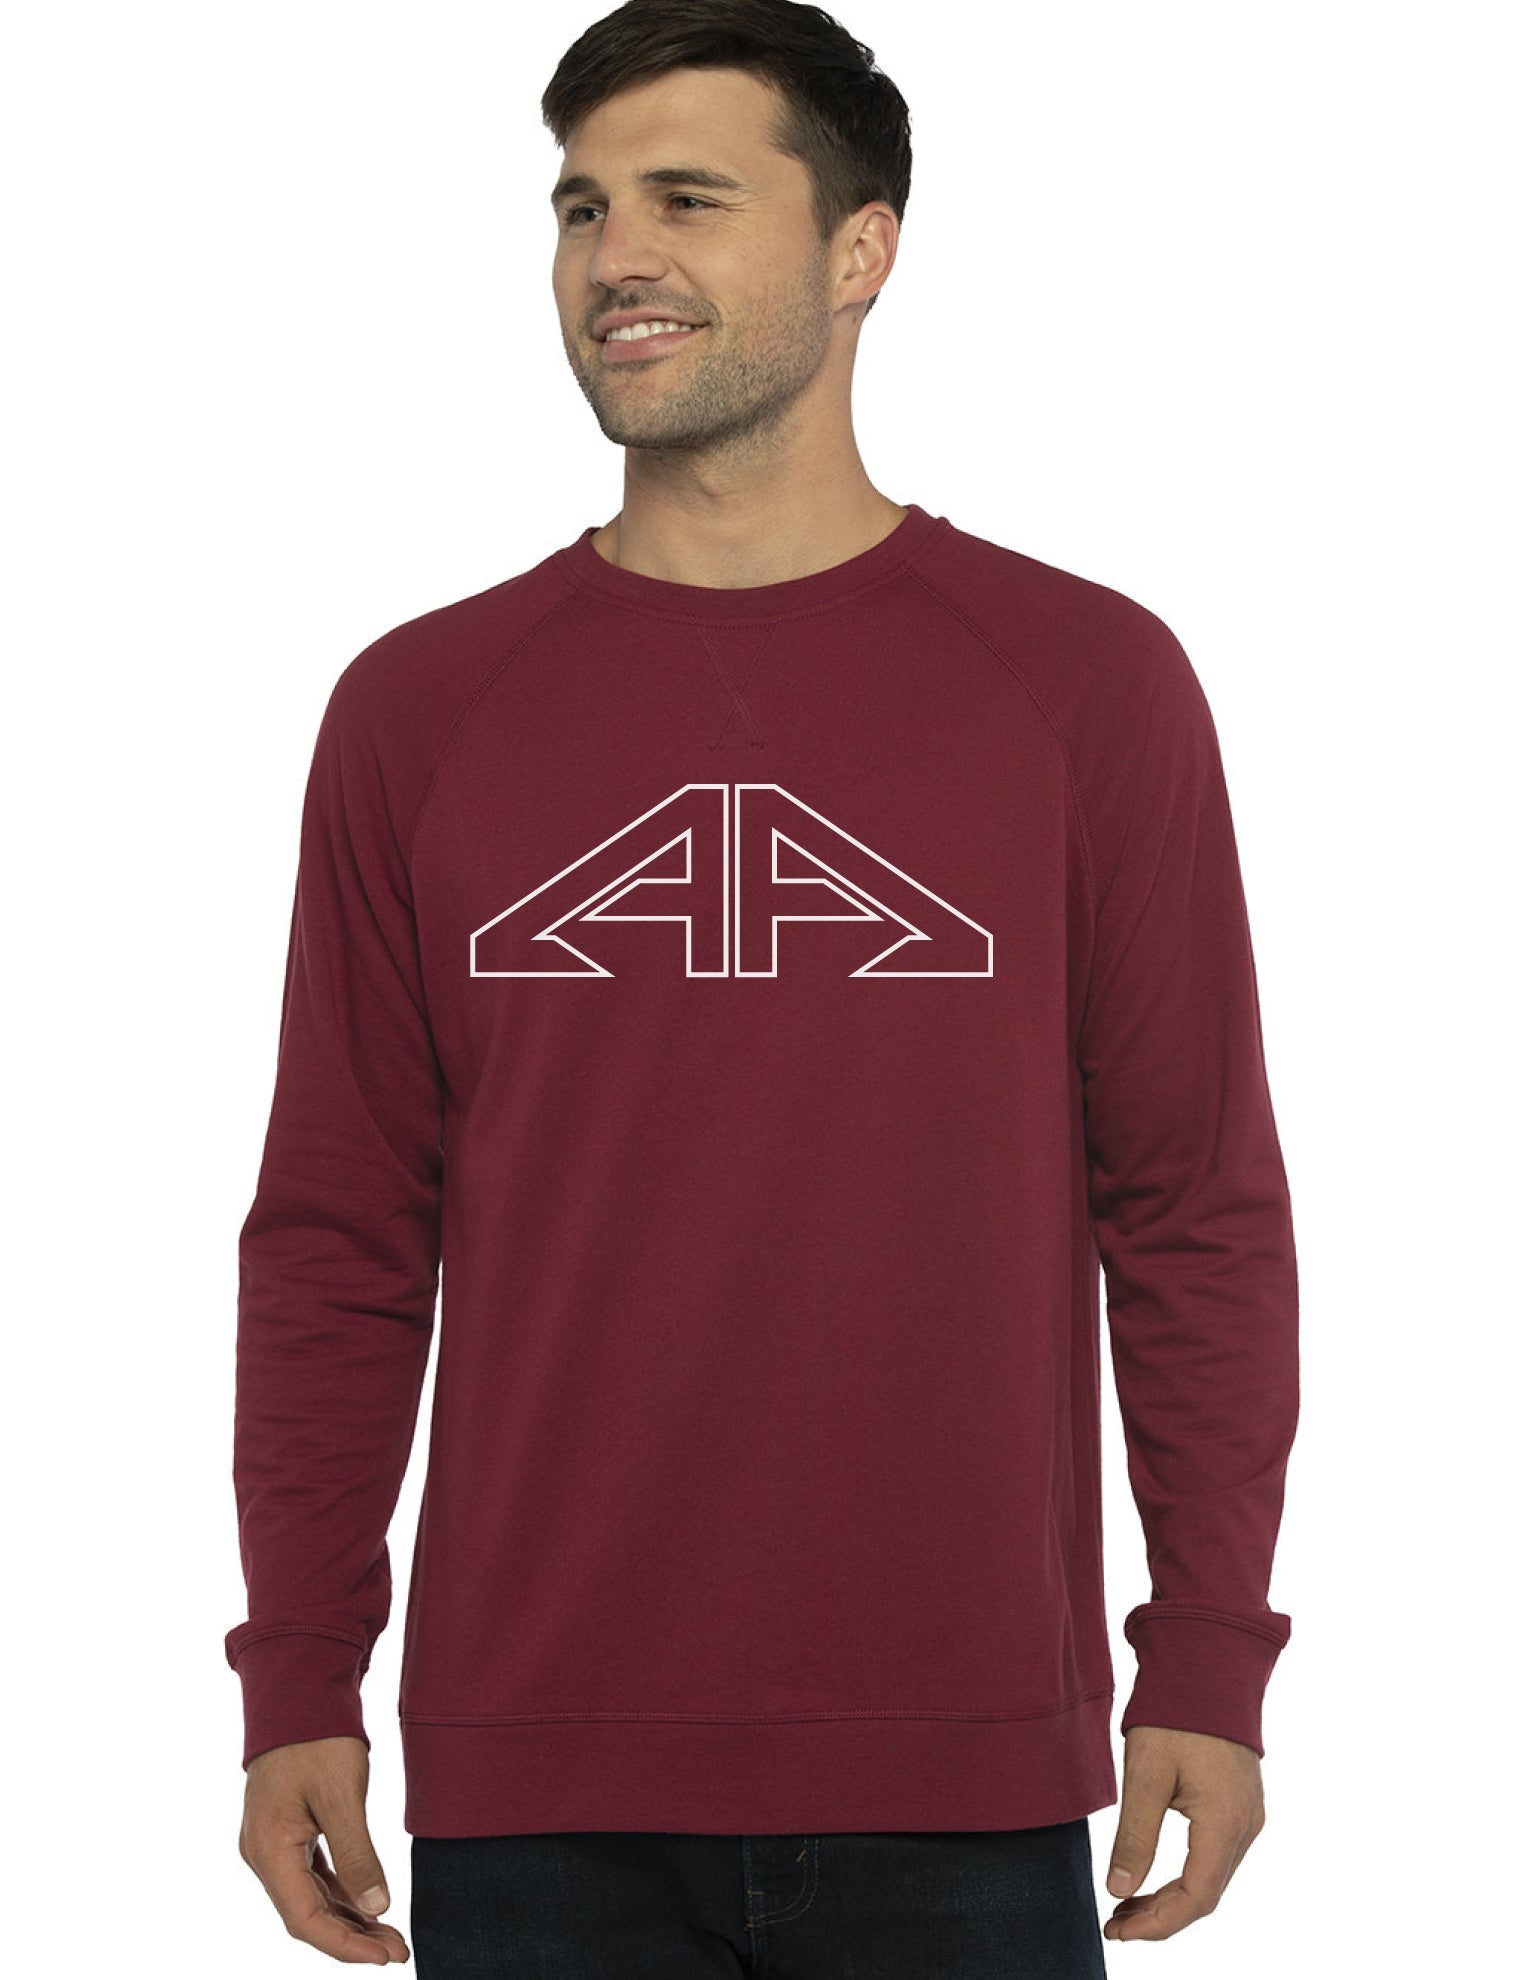 The Classic - Long Sleeve